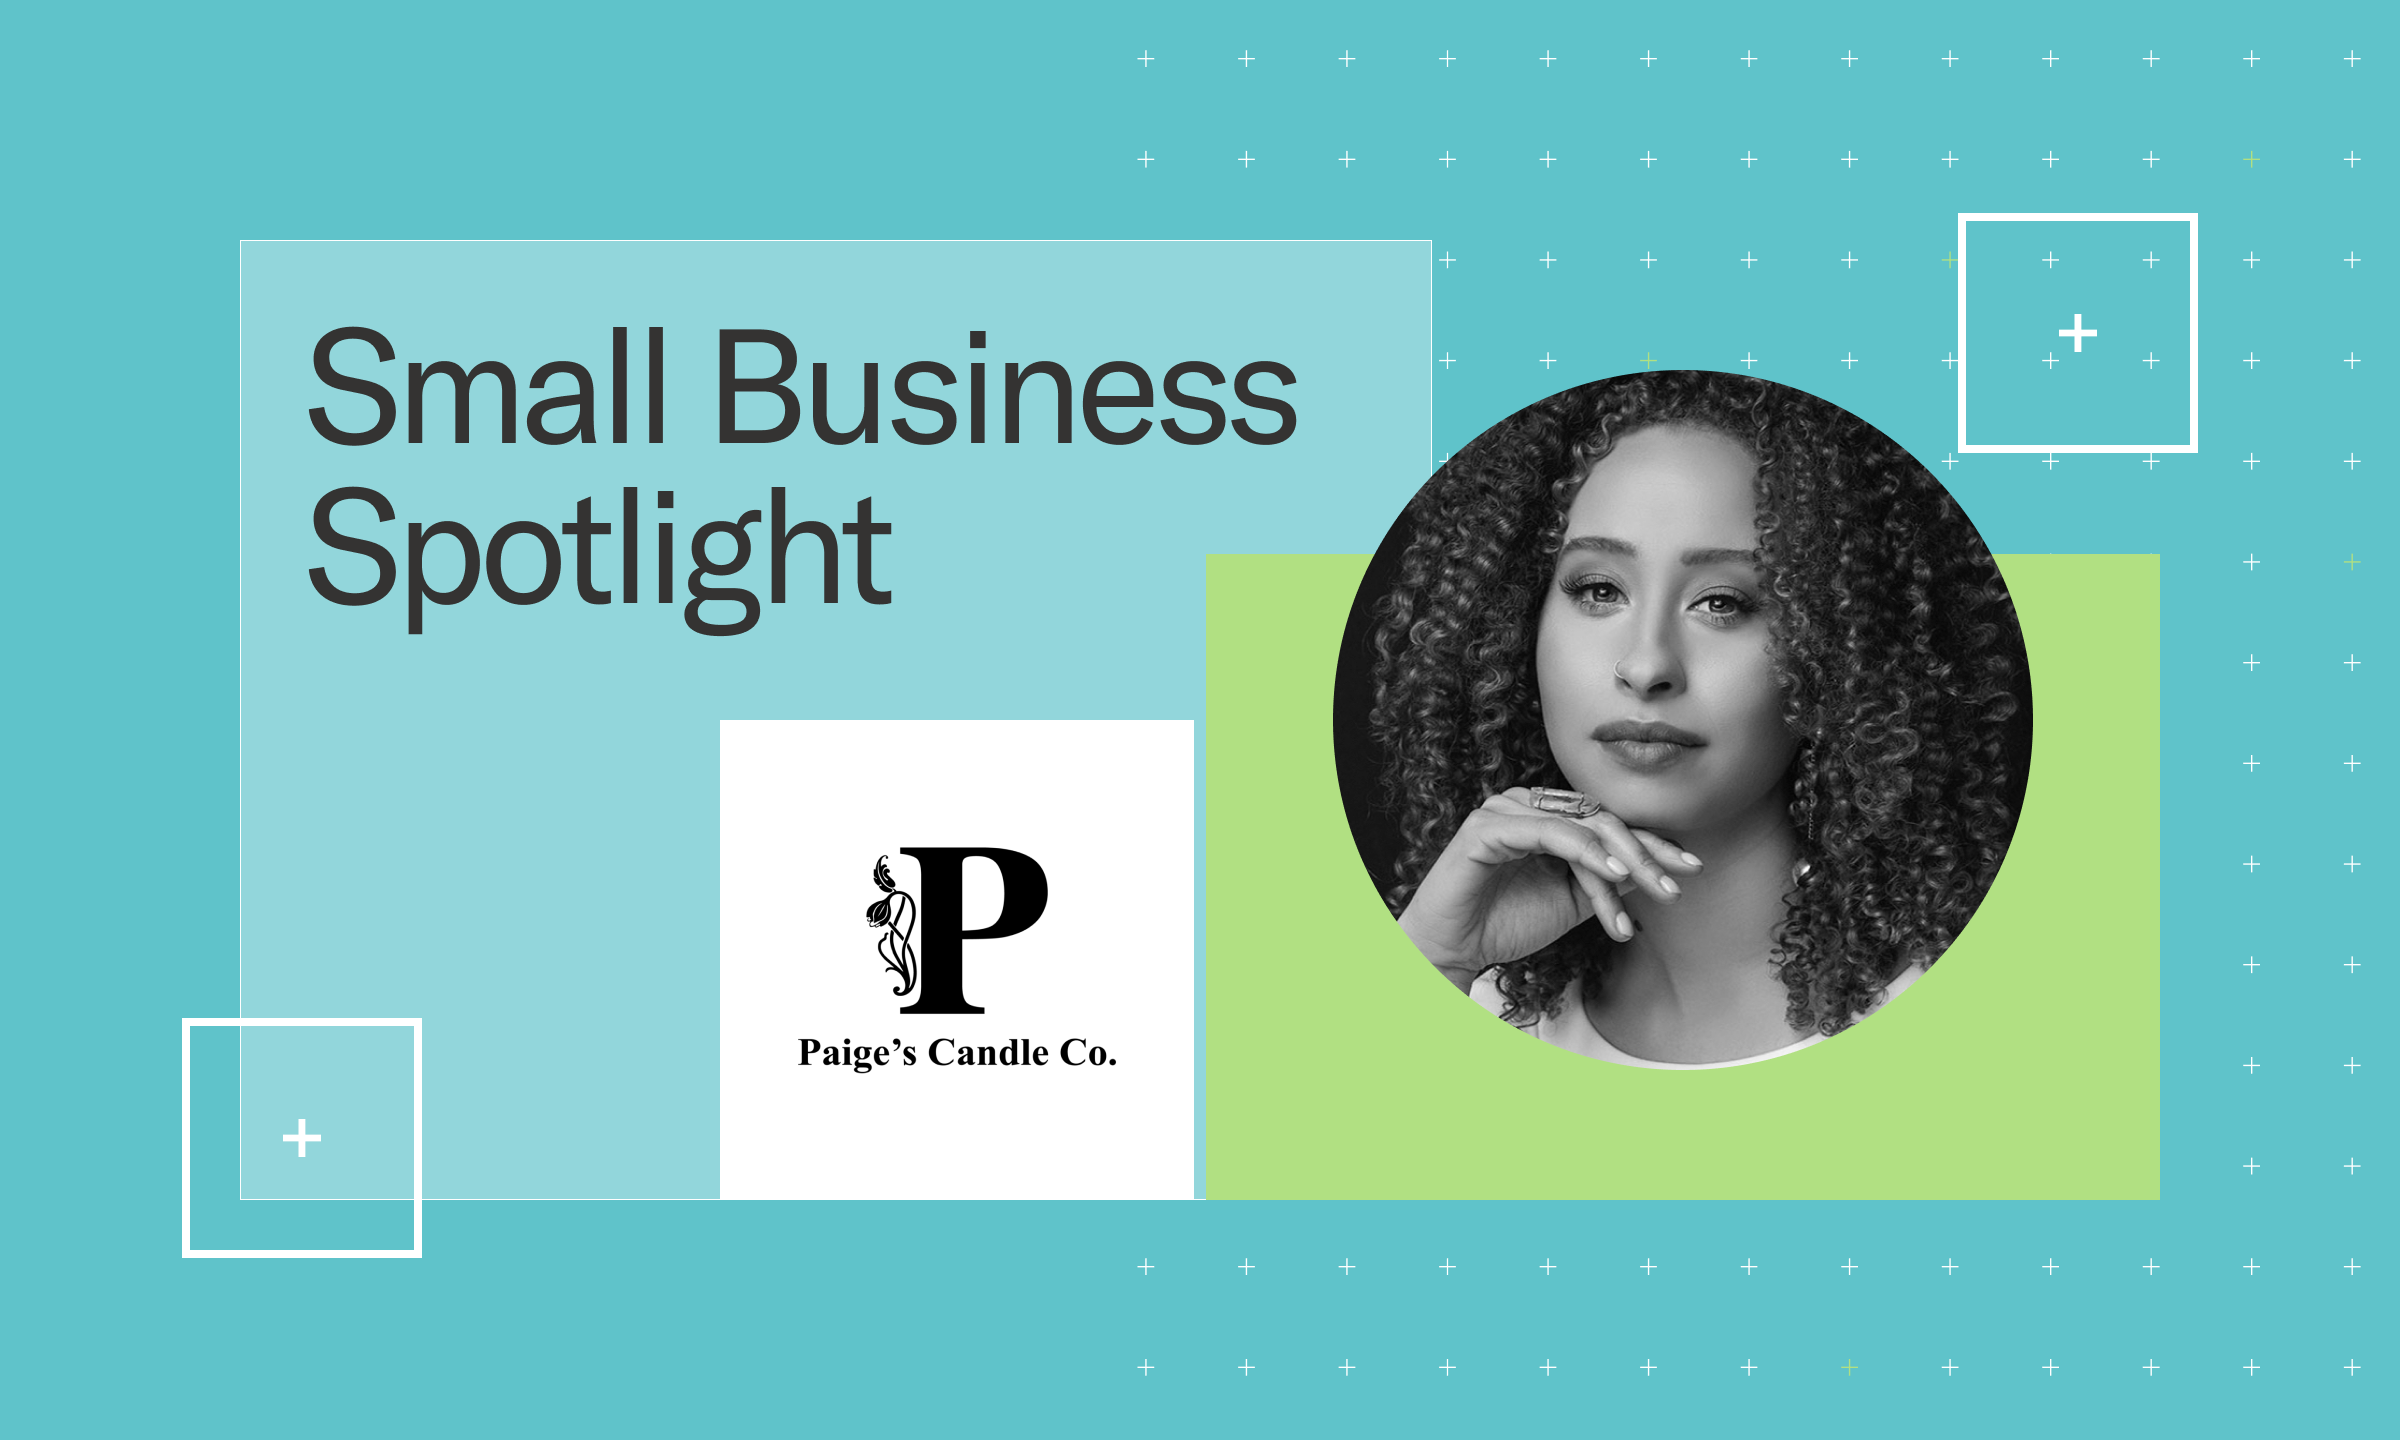 Headline "small business spotlight" and the Paige's Candle Company logo alongside a round headshot of Paige Graham against a blue background